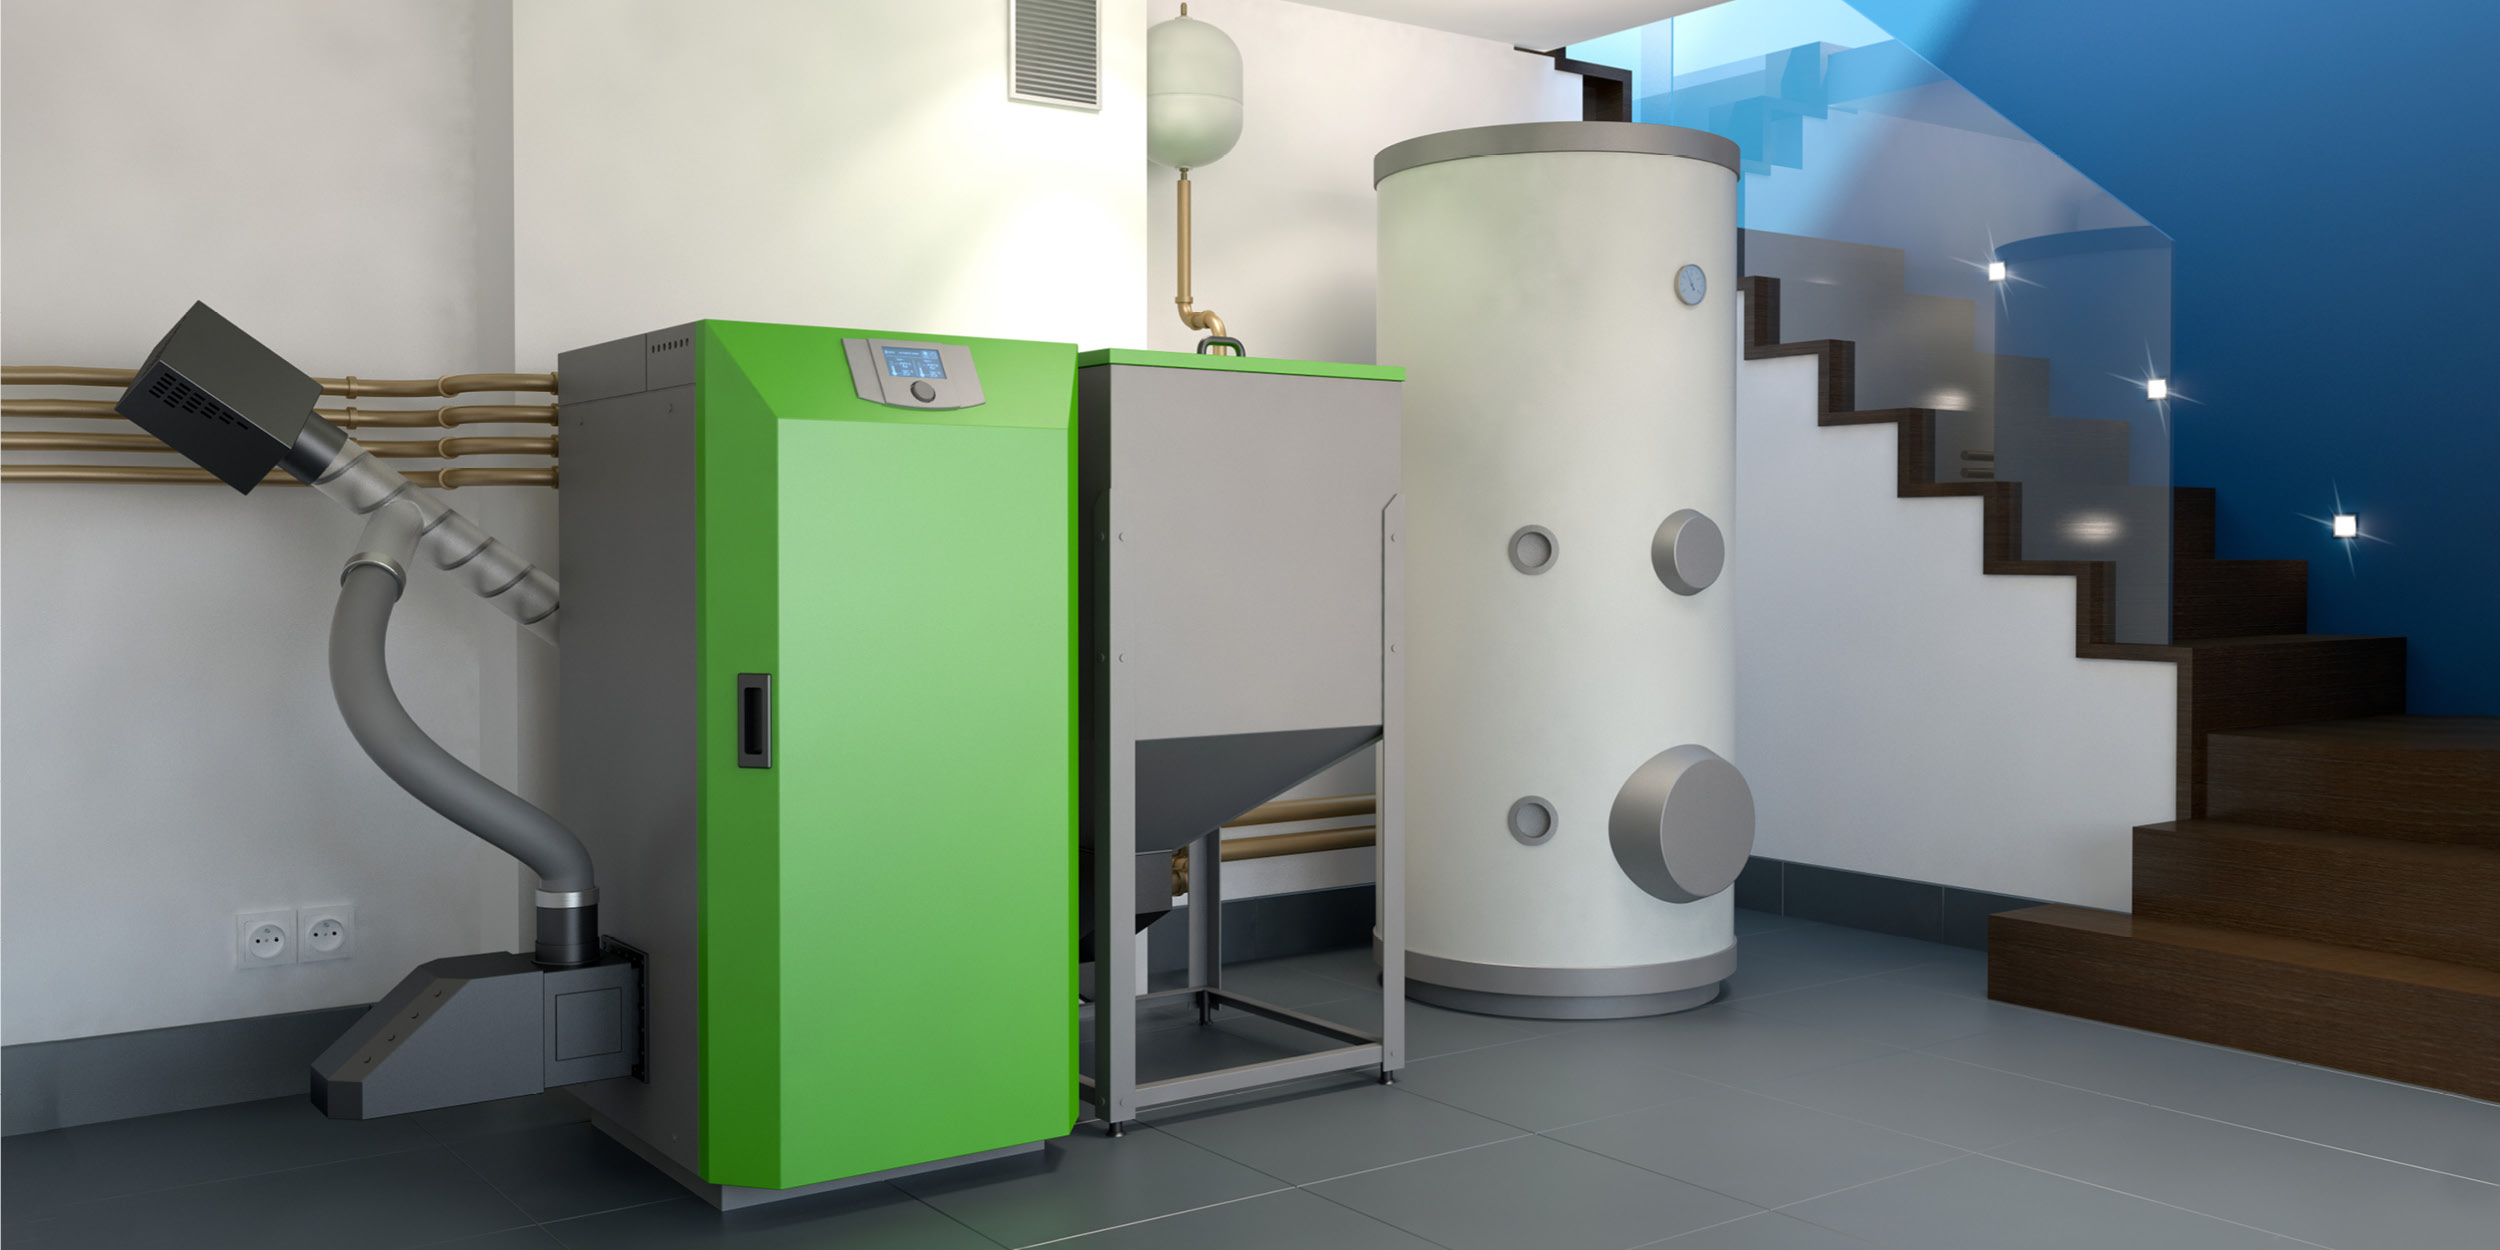 What’s changing for RHI recipients with biomass appliances?